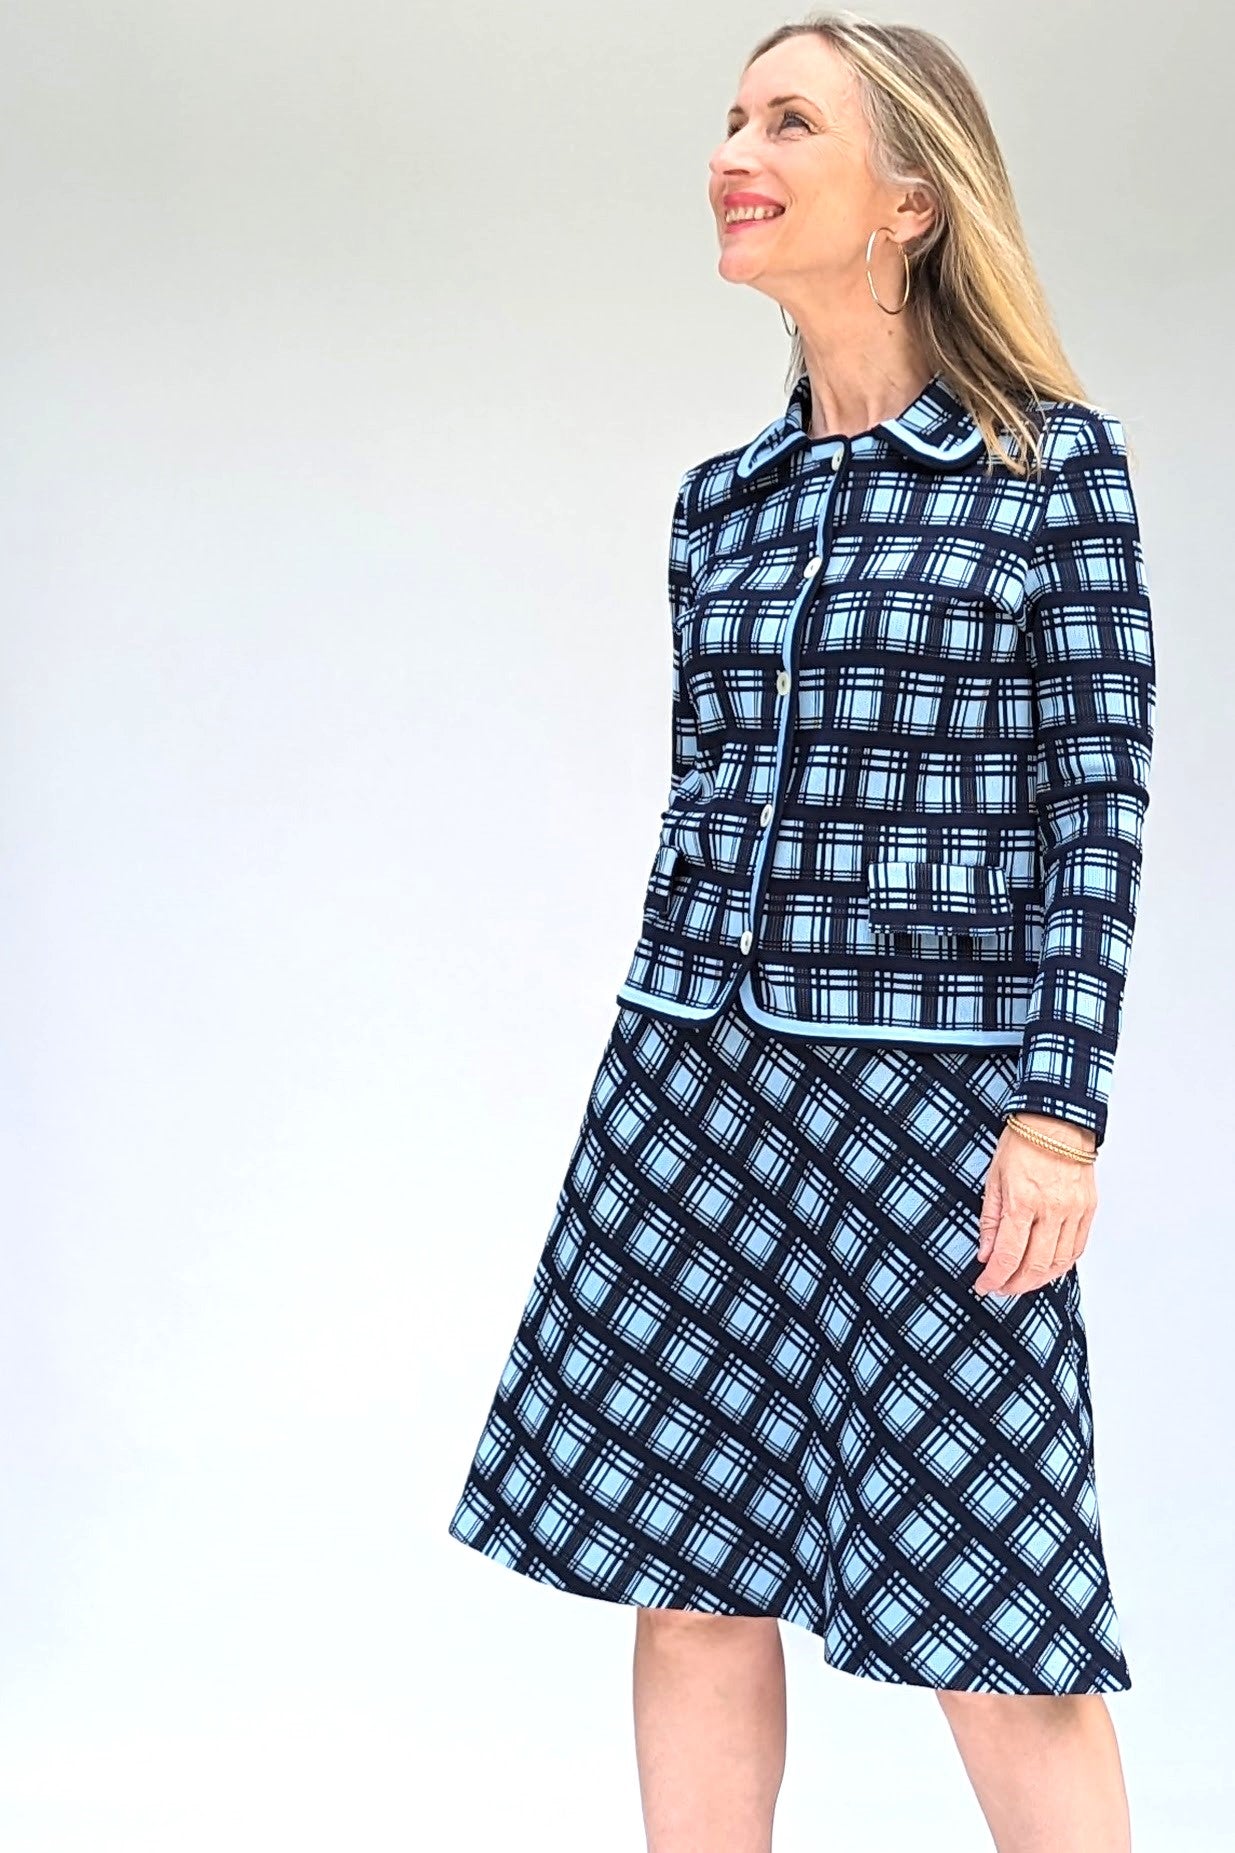 Vintage checked skirt suit